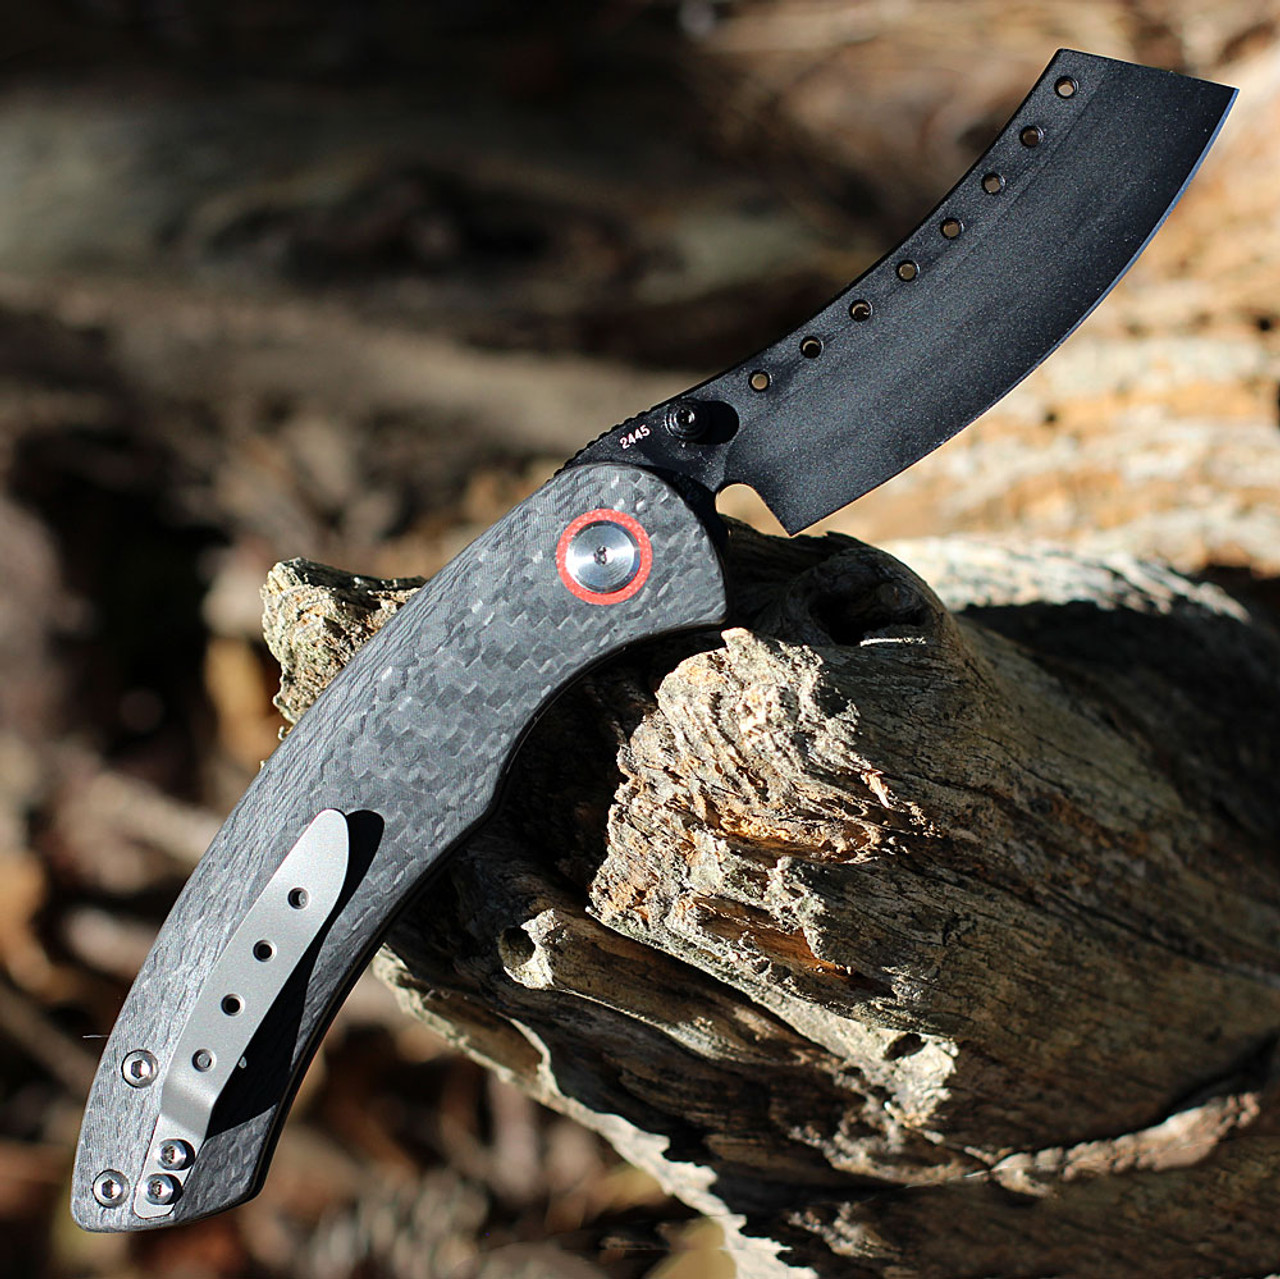 Red Horse Knife Works Hell Razor P Series (RH010)- 3.75in CPM-S35VN Black PVD Cleaver Plain Blade, Twill Carbon Fiber Handle